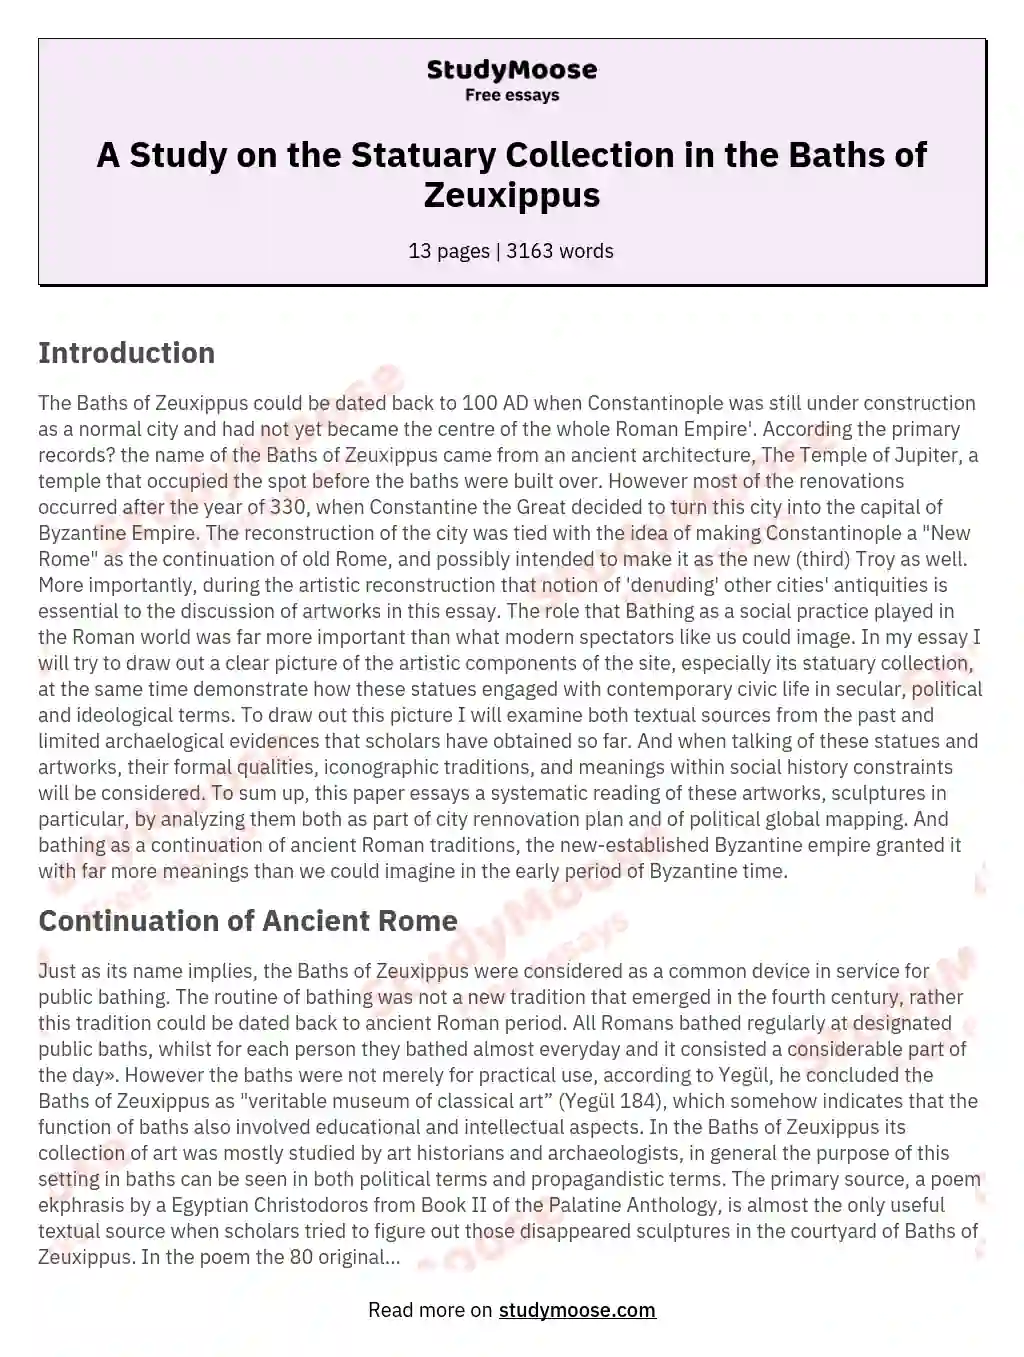 A Study on the Statuary Collection in the Baths of Zeuxippus